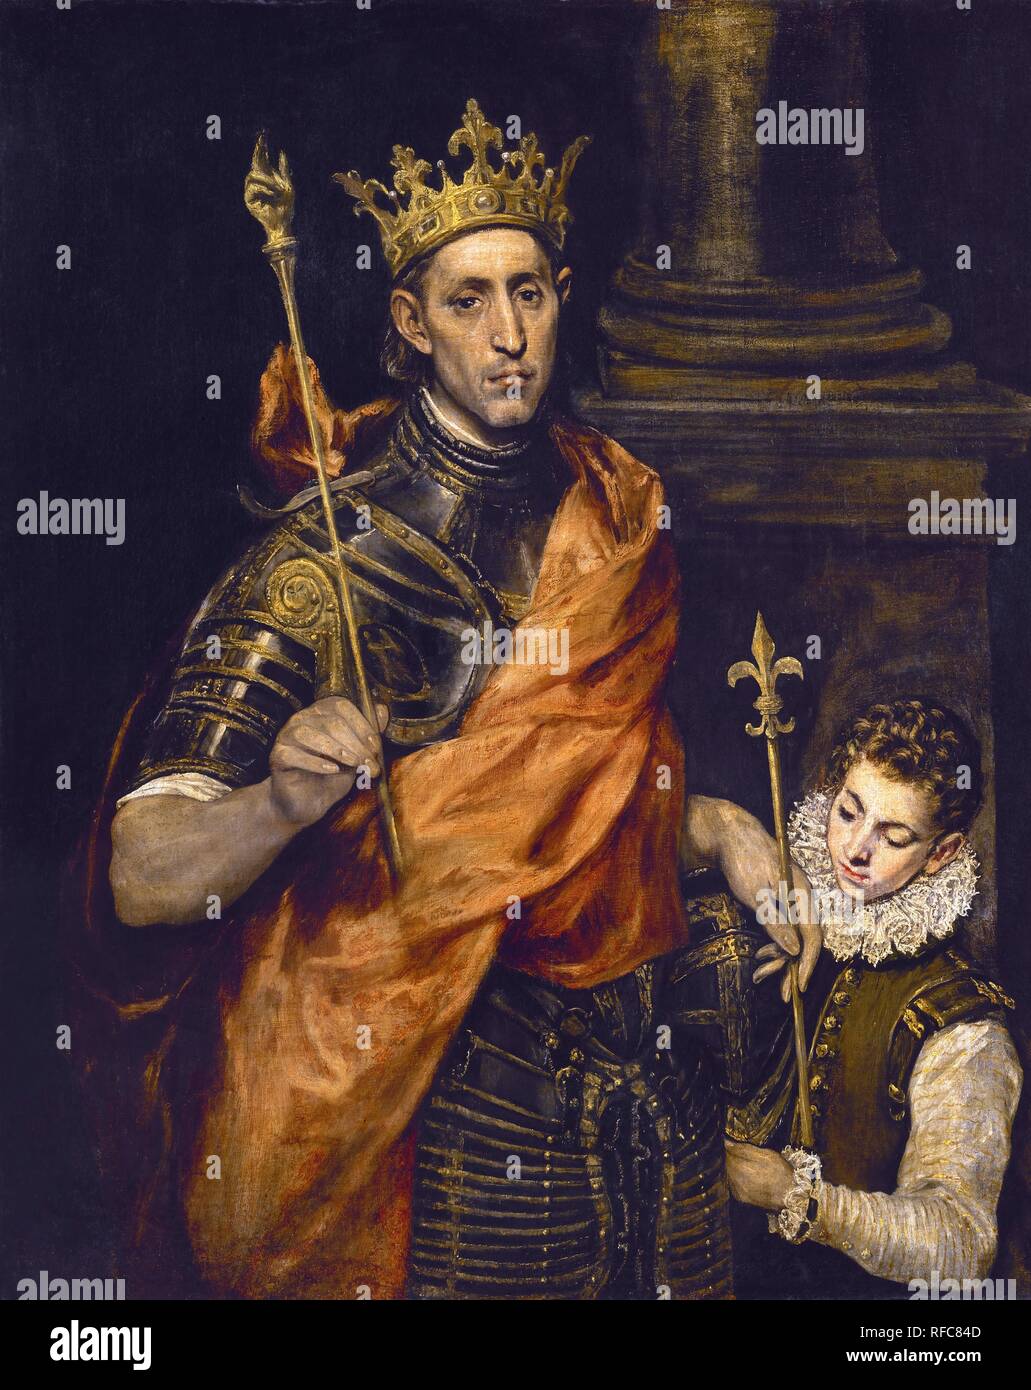 'Louis IX of France, and a Page', 1585-1590, Oil on canvas, 120 x 96 cm. Author: GRECO, EL. Location: LOUVRE MUSEUM-PAINTINGS. France. Stock Photo